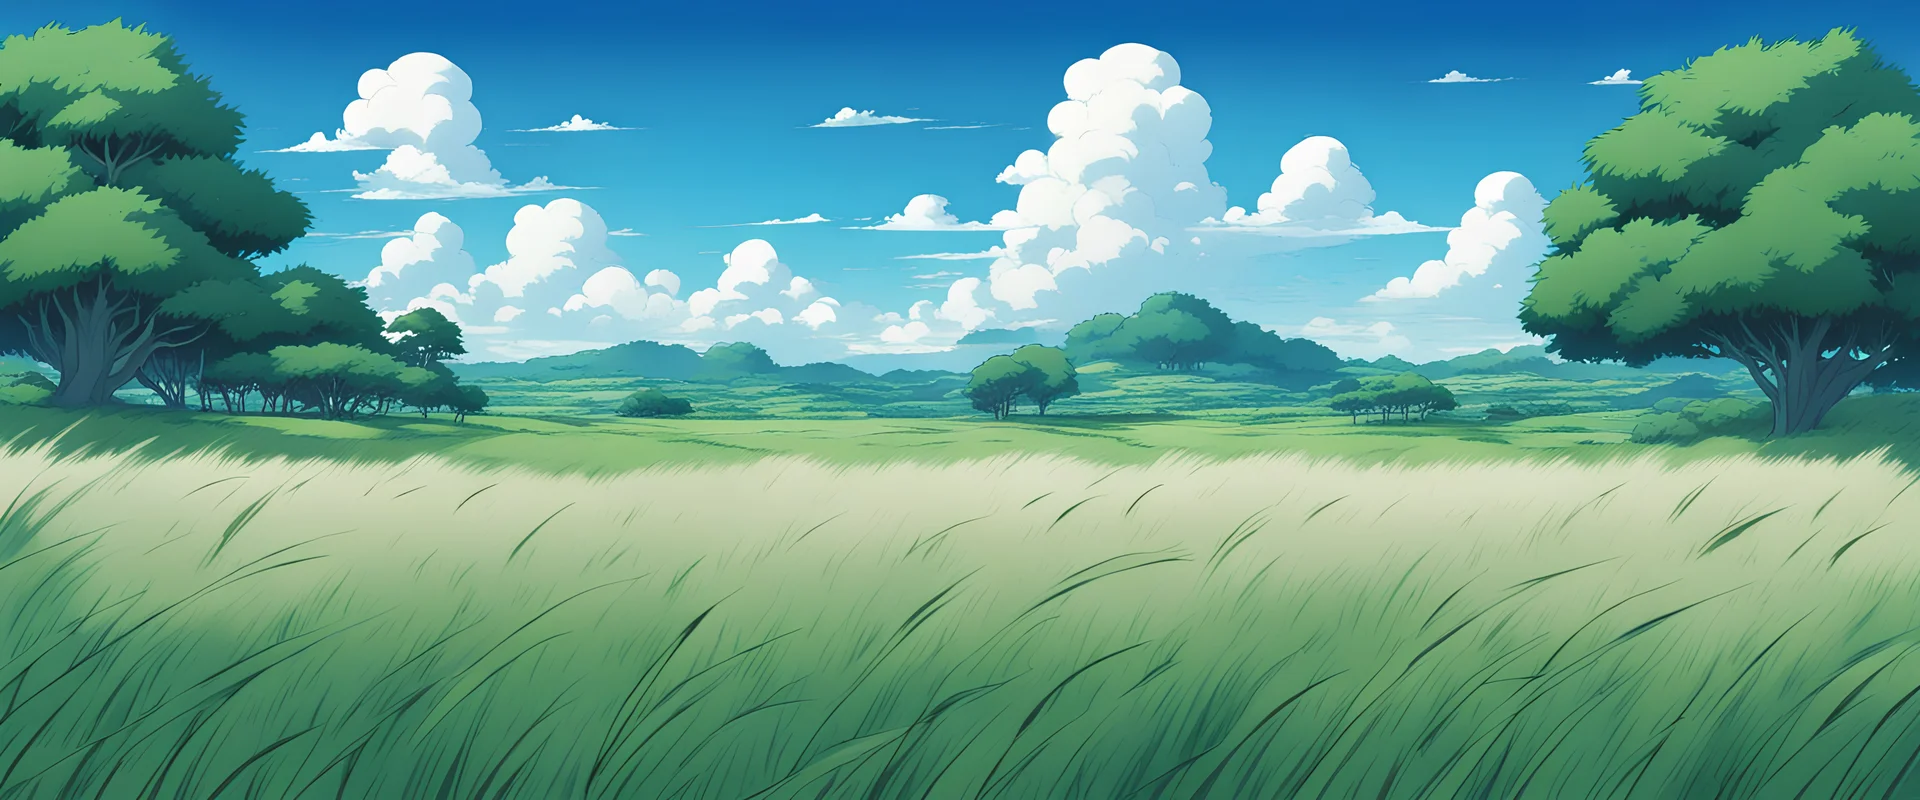 prompthunt: illustration of a wide shot green hills with clouds in the  background, cute anime girl with platinum blonde hair and big eyes in  foreground, anime key visual, official media, illustrated by